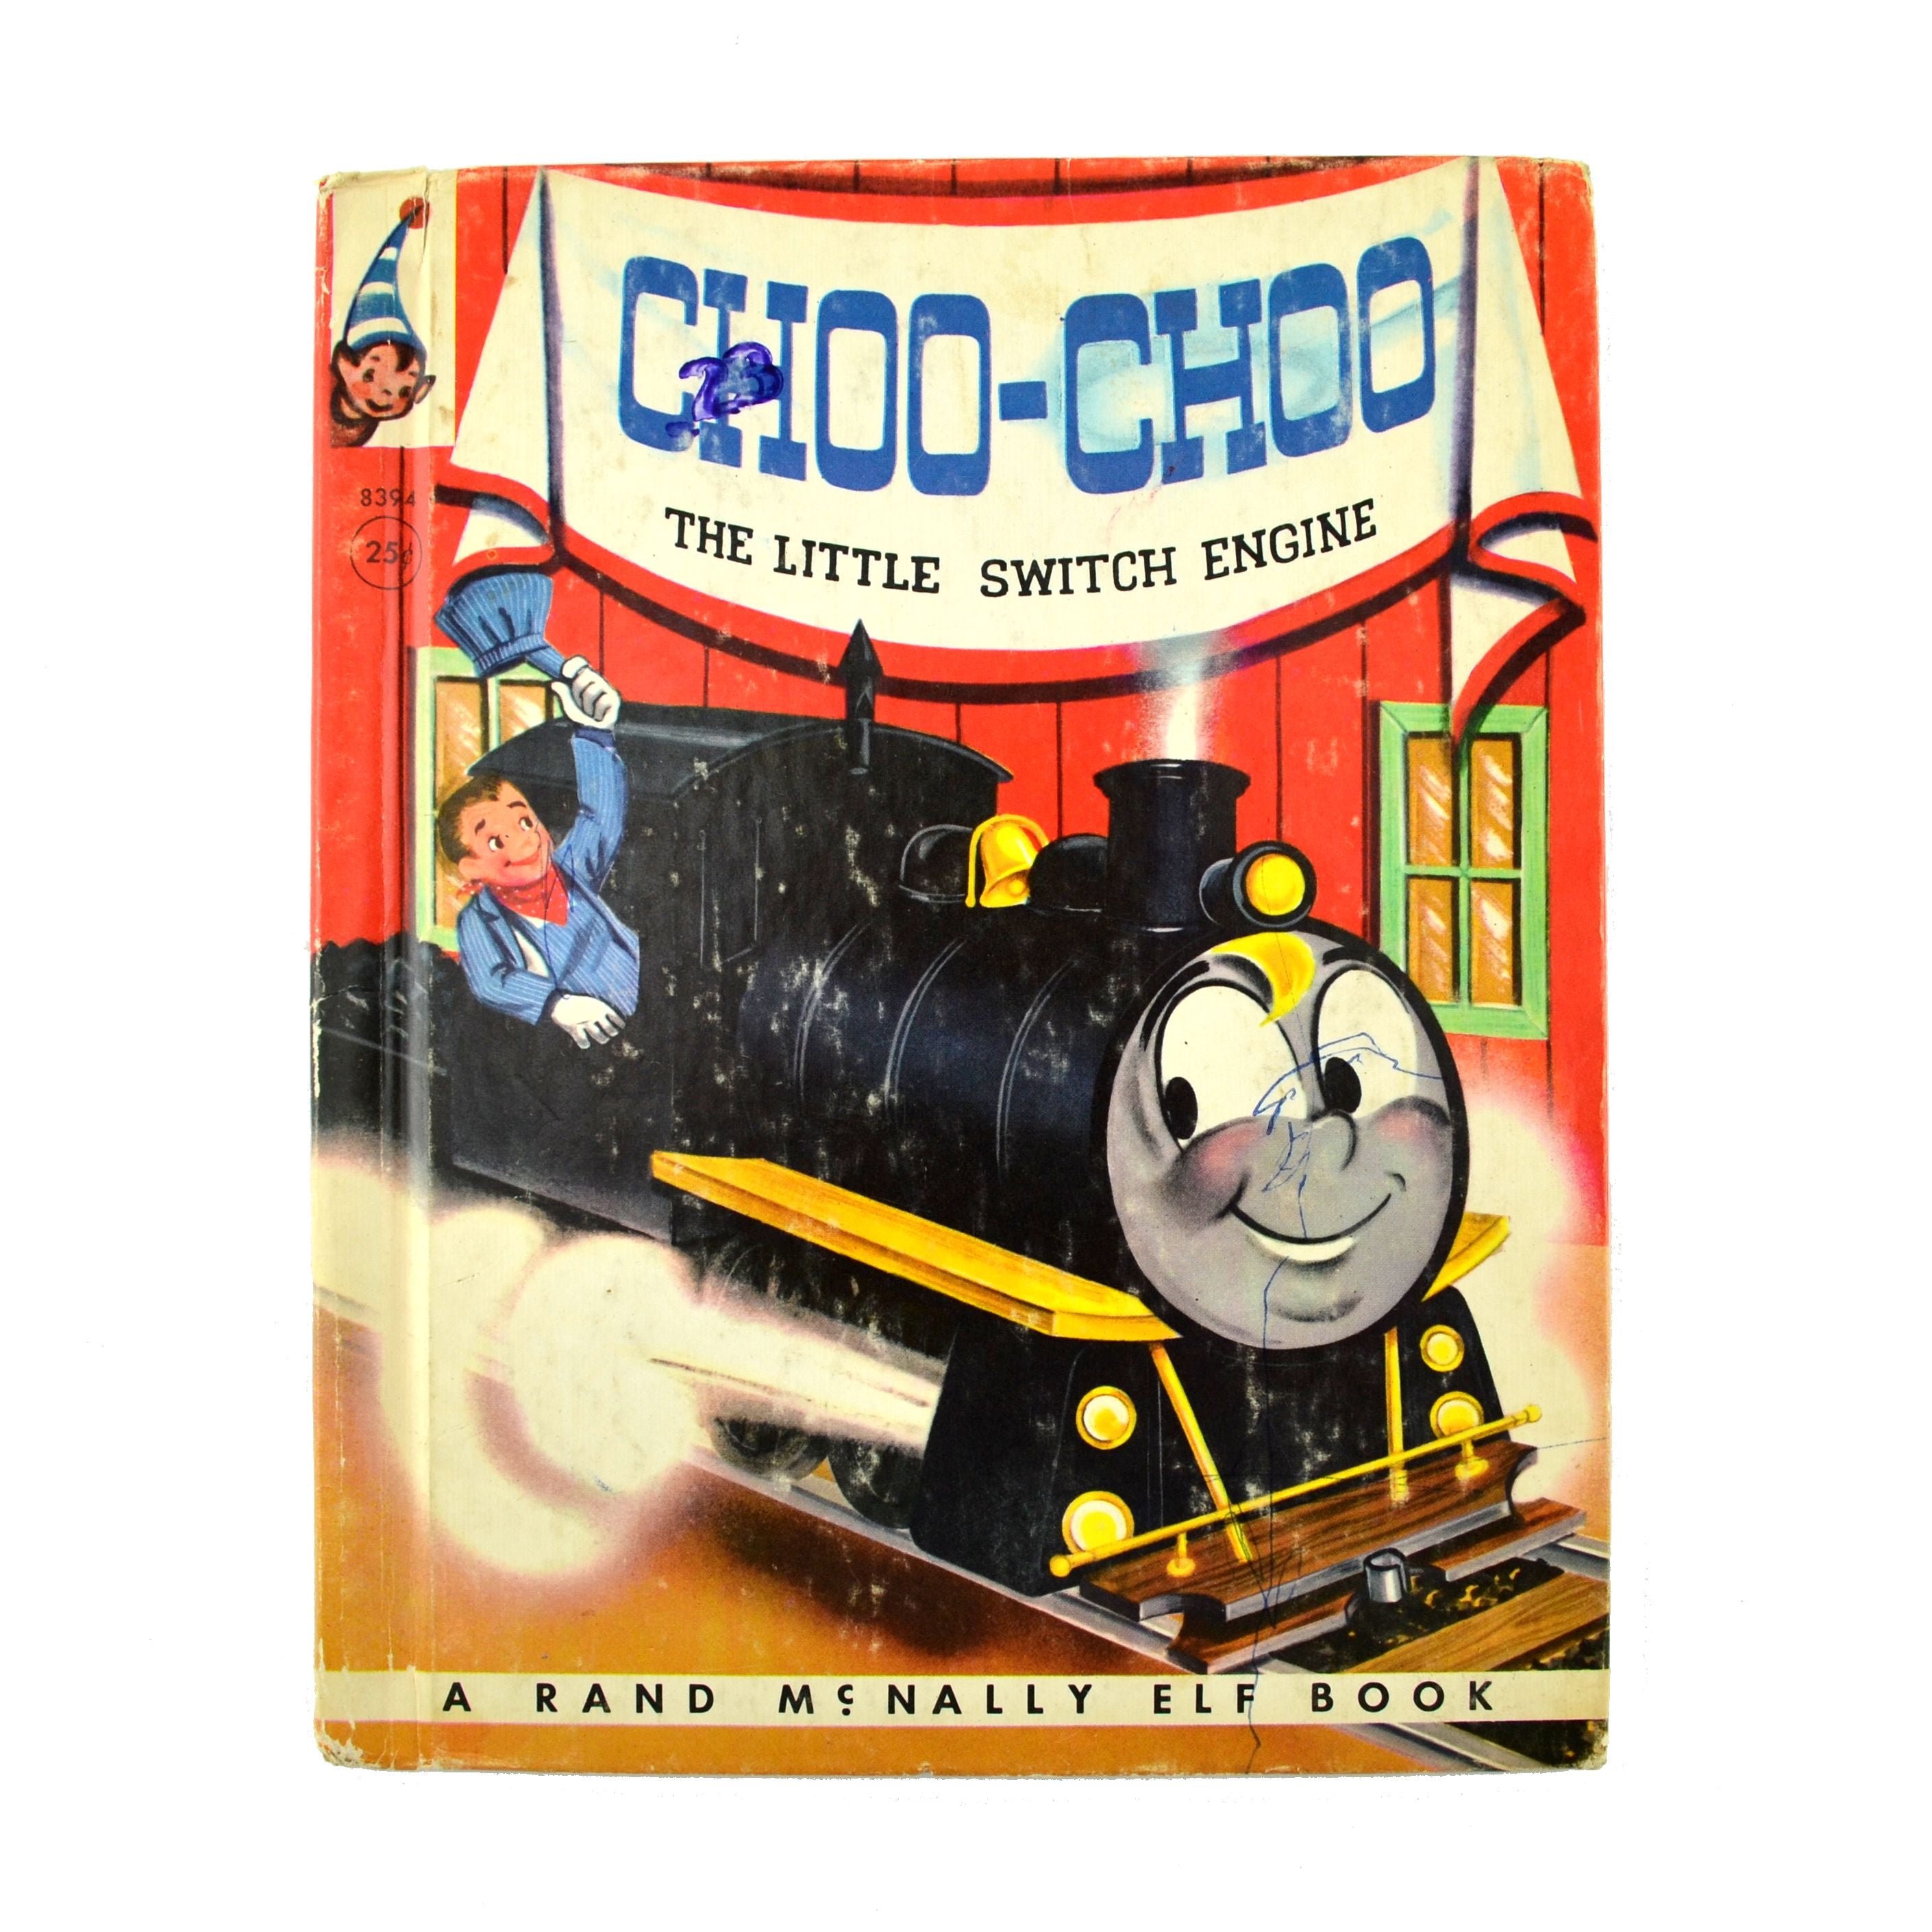 Choo Choo the Little Switch Engine * Tip Top Elf Book by Wallace